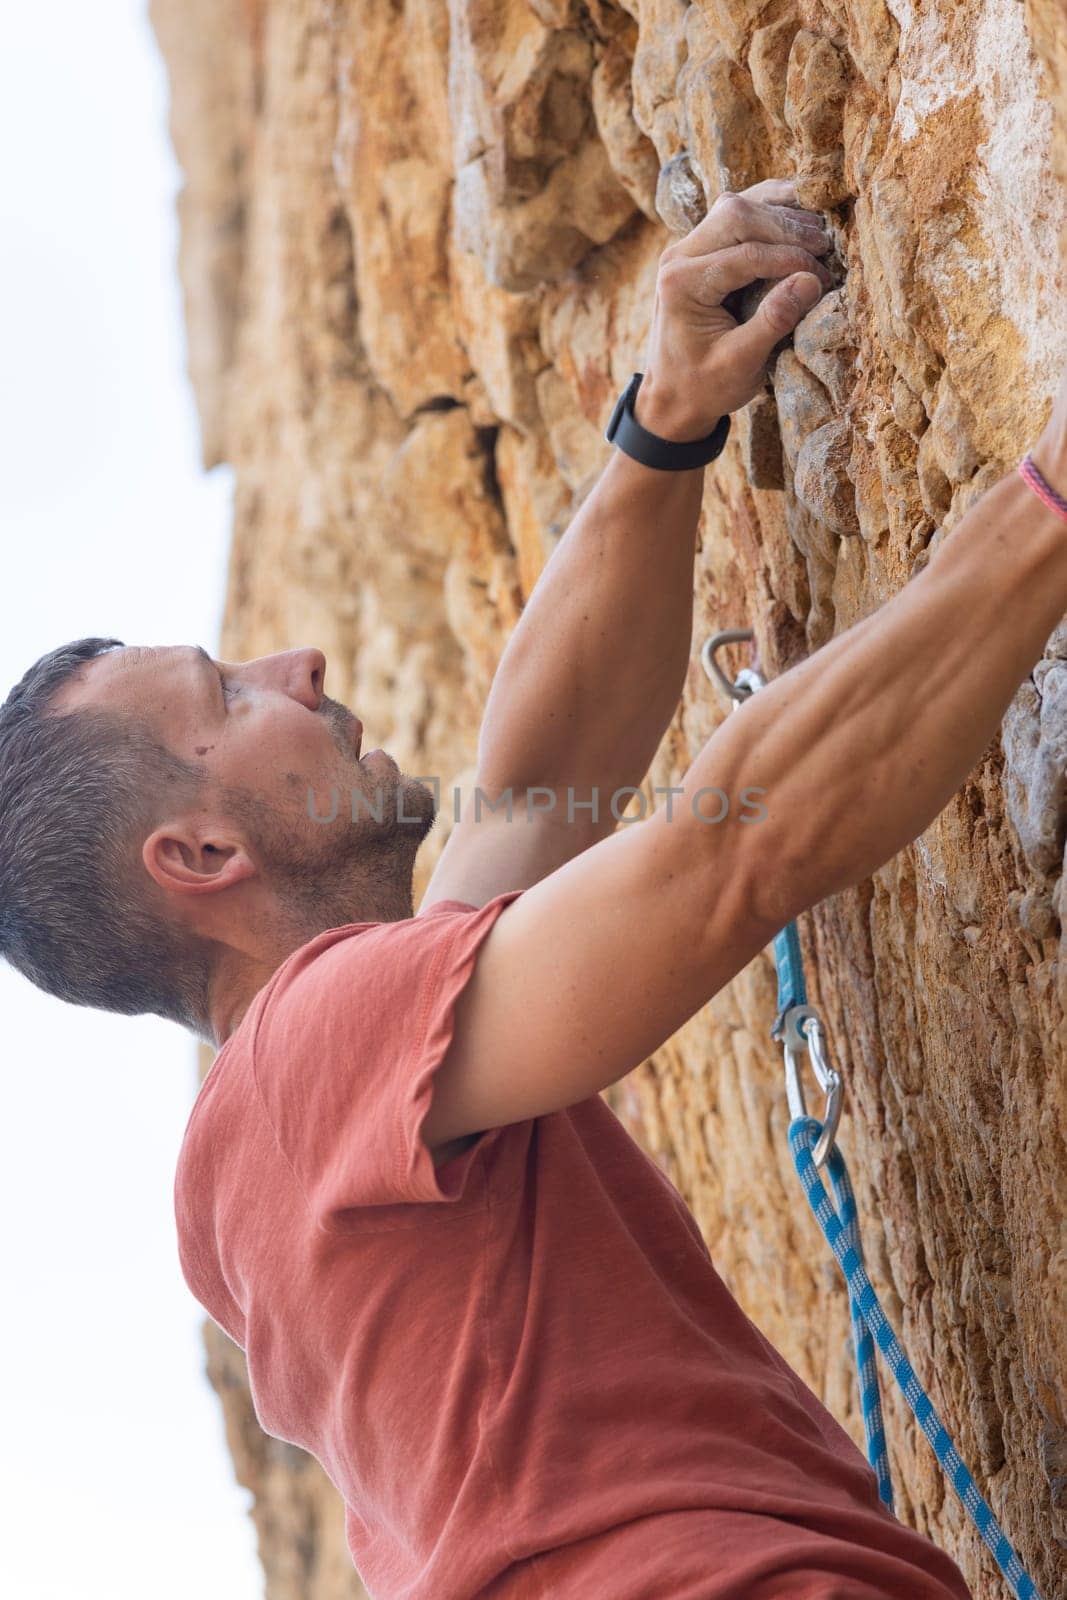 A man in a red shirt is climbing a rock wall. He is wearing a watch and a black wristband